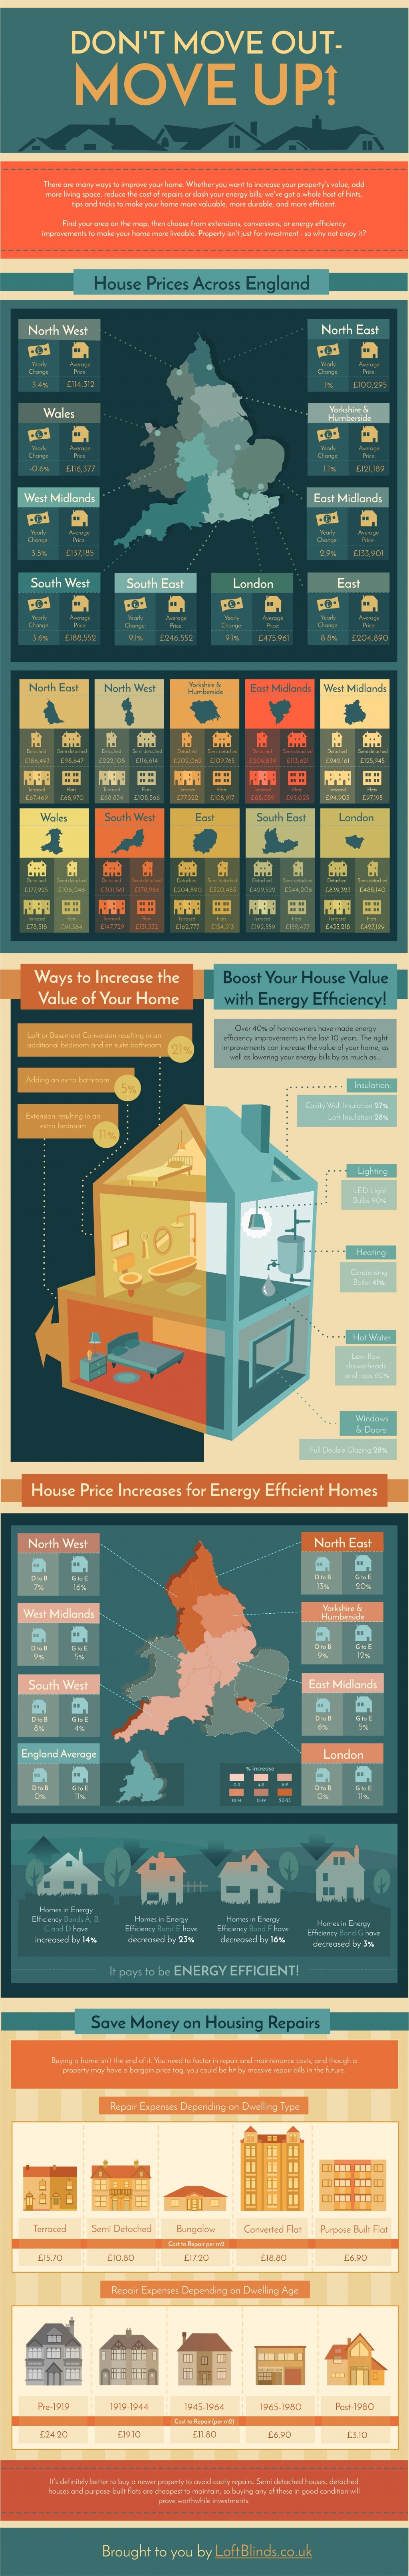 How to improve the value of your home